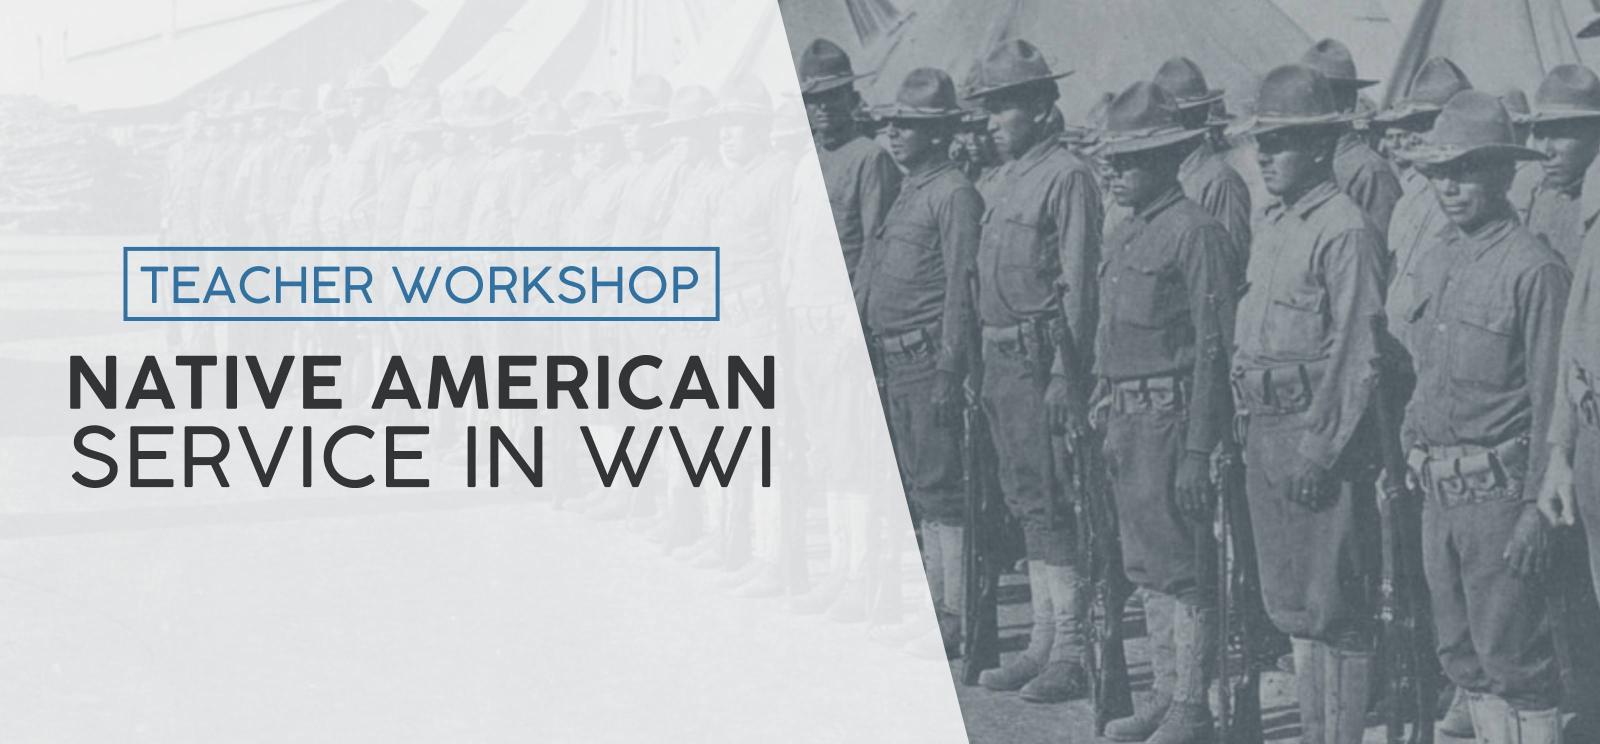 Greyscale picture of Native American soldiers in WWI lined up. Text: Teacher Workshop / Native American Service in WWI